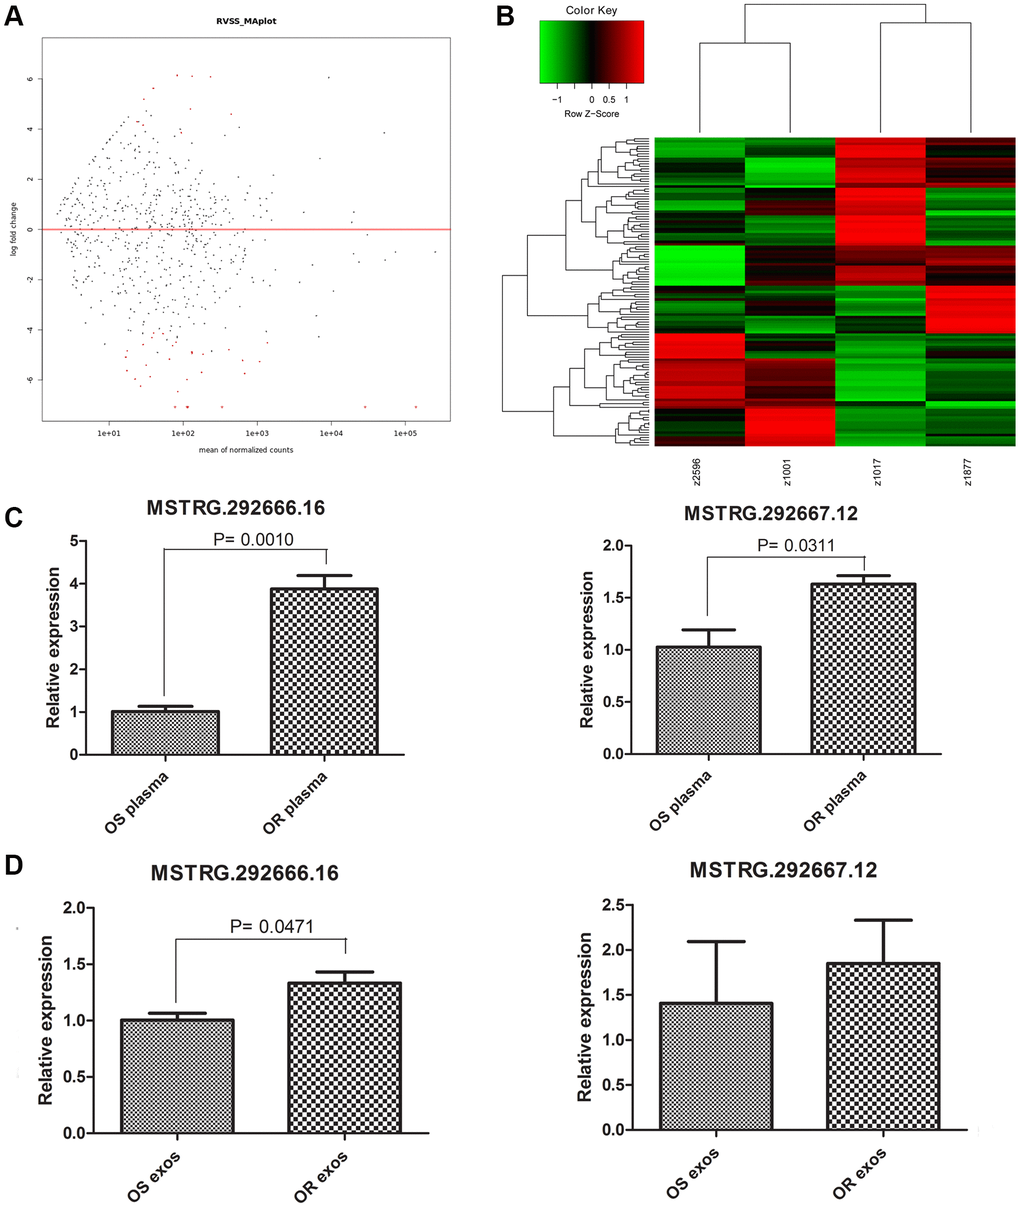 Characterizing of long non-coding RNAs (lncRNAs) profiles. (A) MA plot displayed the differentially expressed lncRNAs between osimertinib-resistant exosomes and osimertinib-sensitive exosomes. (B) Heatmap displayed the differentially expressed lncRNAs between osimertinib-resistant exosomes and osimertinib-sensitive exosomes. z2596 and z1001 are exosomes isolated from two patients before osimertinib treatment, while z1017 and z1877 are exosomes isolated from the same patients acquired osimertinib resistance. (C) qRT-PCR determined the relative expression of lncRNA MSTRG.292666.16 and lncRNA MSTRG.292667.12 between osimertinib-resistant plasma and osimertinib-sensitive plasma. OS: osimertinib-sensitive; OR: osimertinib-resistant. (D) qRT-PCR determined the relative expression of lncRNA MSTRG.292666.16 and lncRNA MSTRG.292667.12 between osimertinib-resistant exosomes and osimertinib-sensitive exosomes. OS: osimertinib-sensitive; OR: osimertinib-resistant.